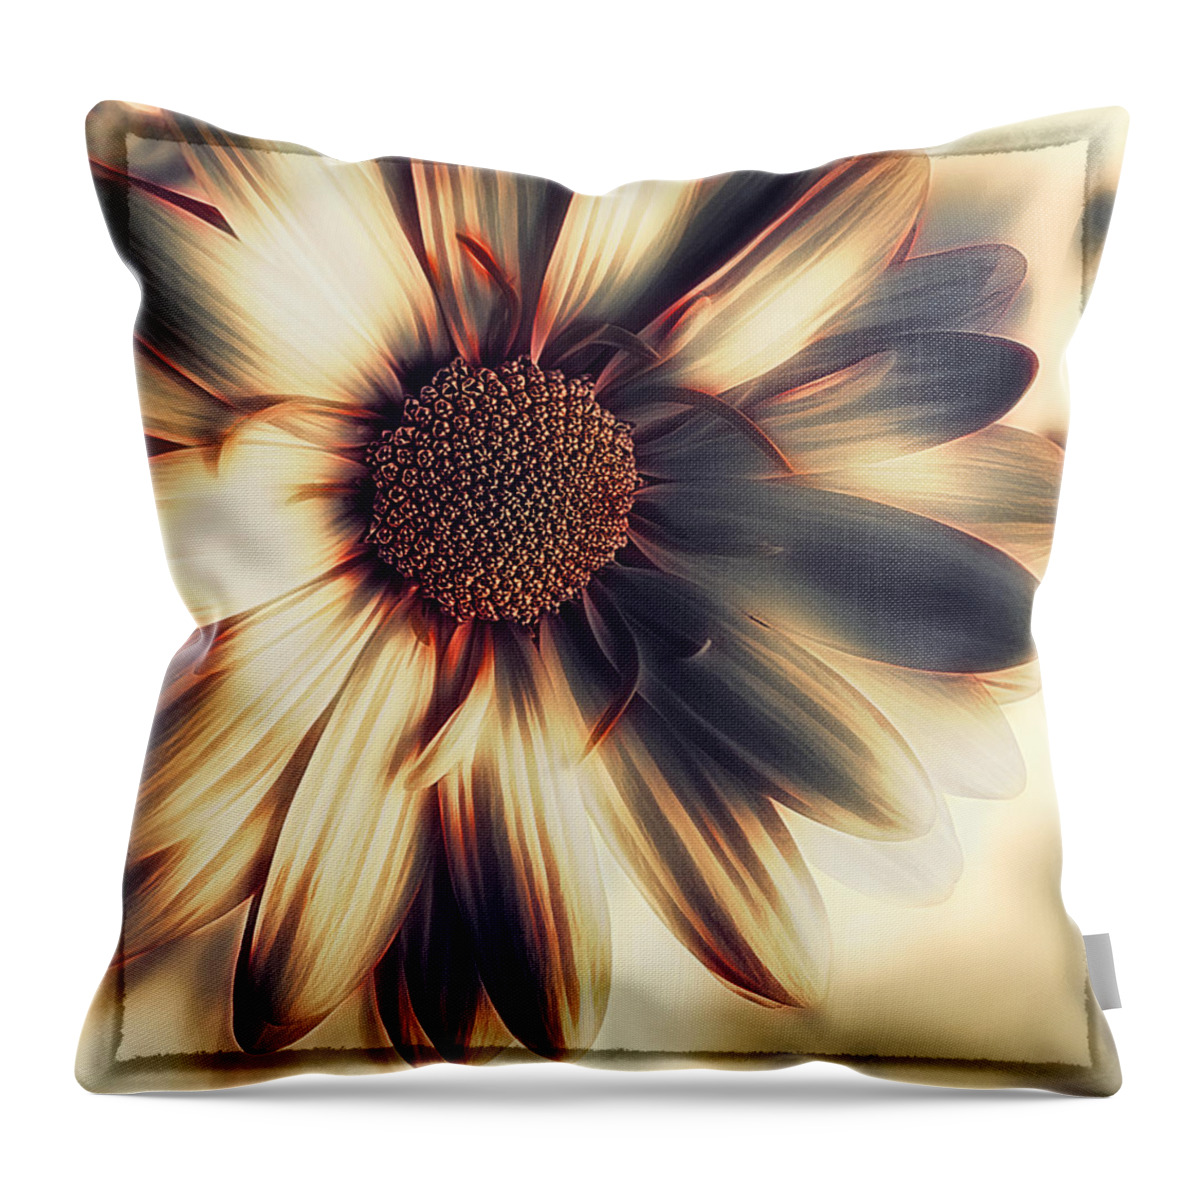 Floral Throw Pillow featuring the photograph Negligee by Darlene Kwiatkowski